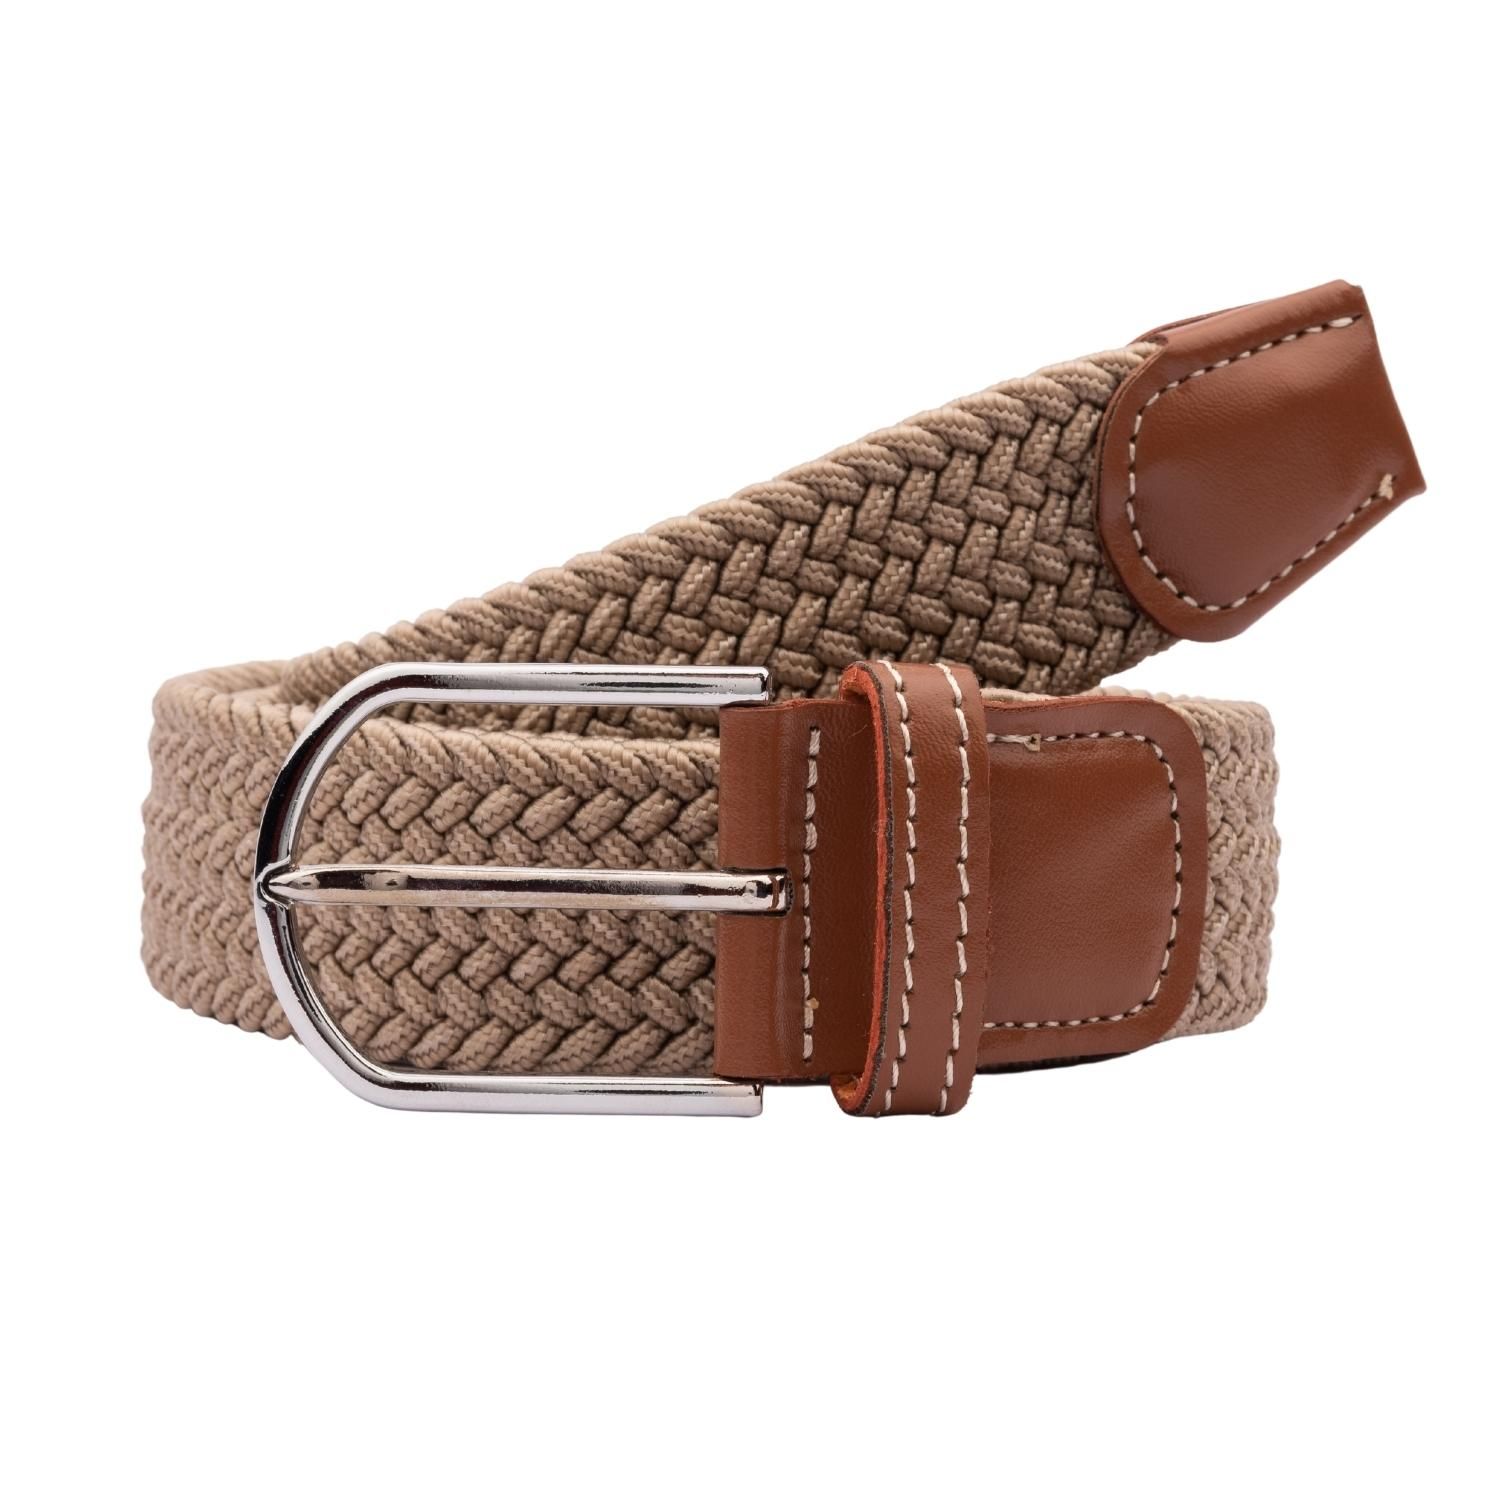 Buy Solid Beige with Brown Woven Braided Stretchable Belt - the tie hub